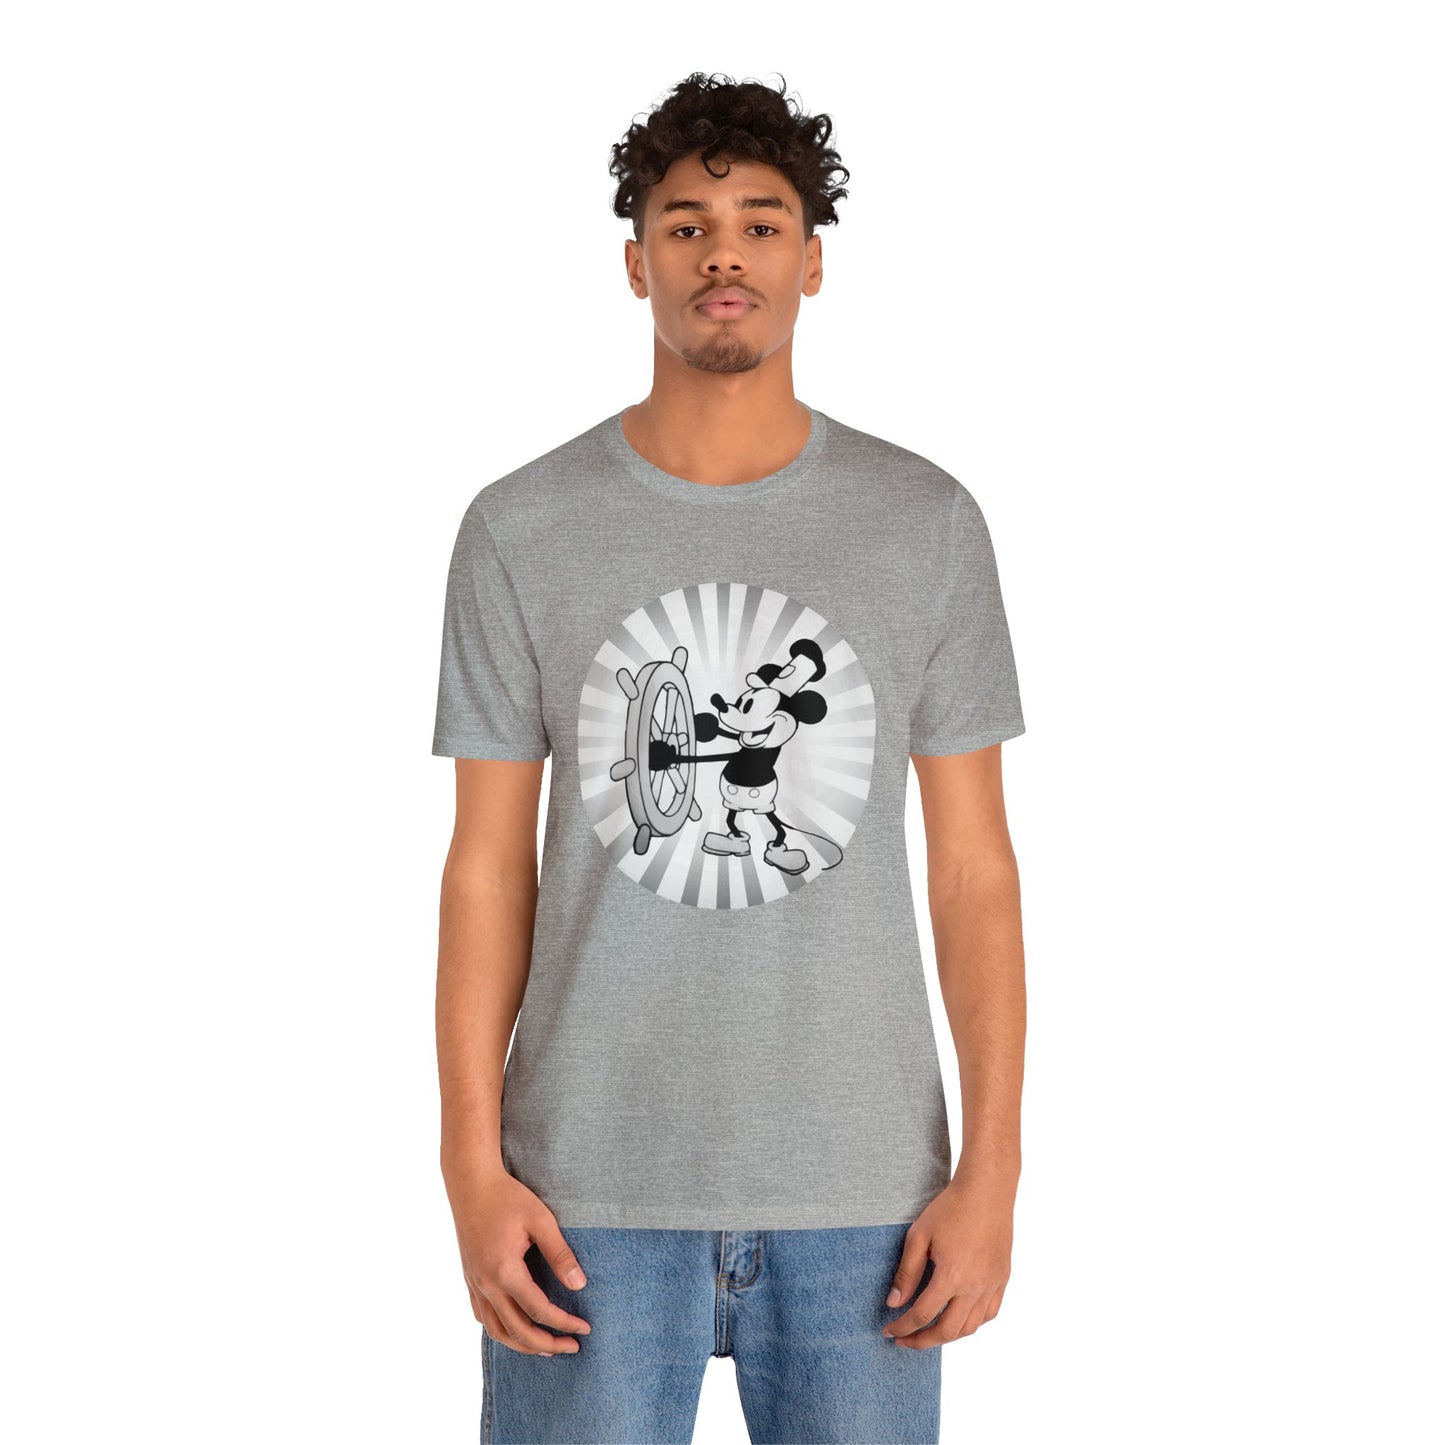 Steamboat Willie at the Helm - Classic TV & Film Unisex Jersey Short Sleeve Tee